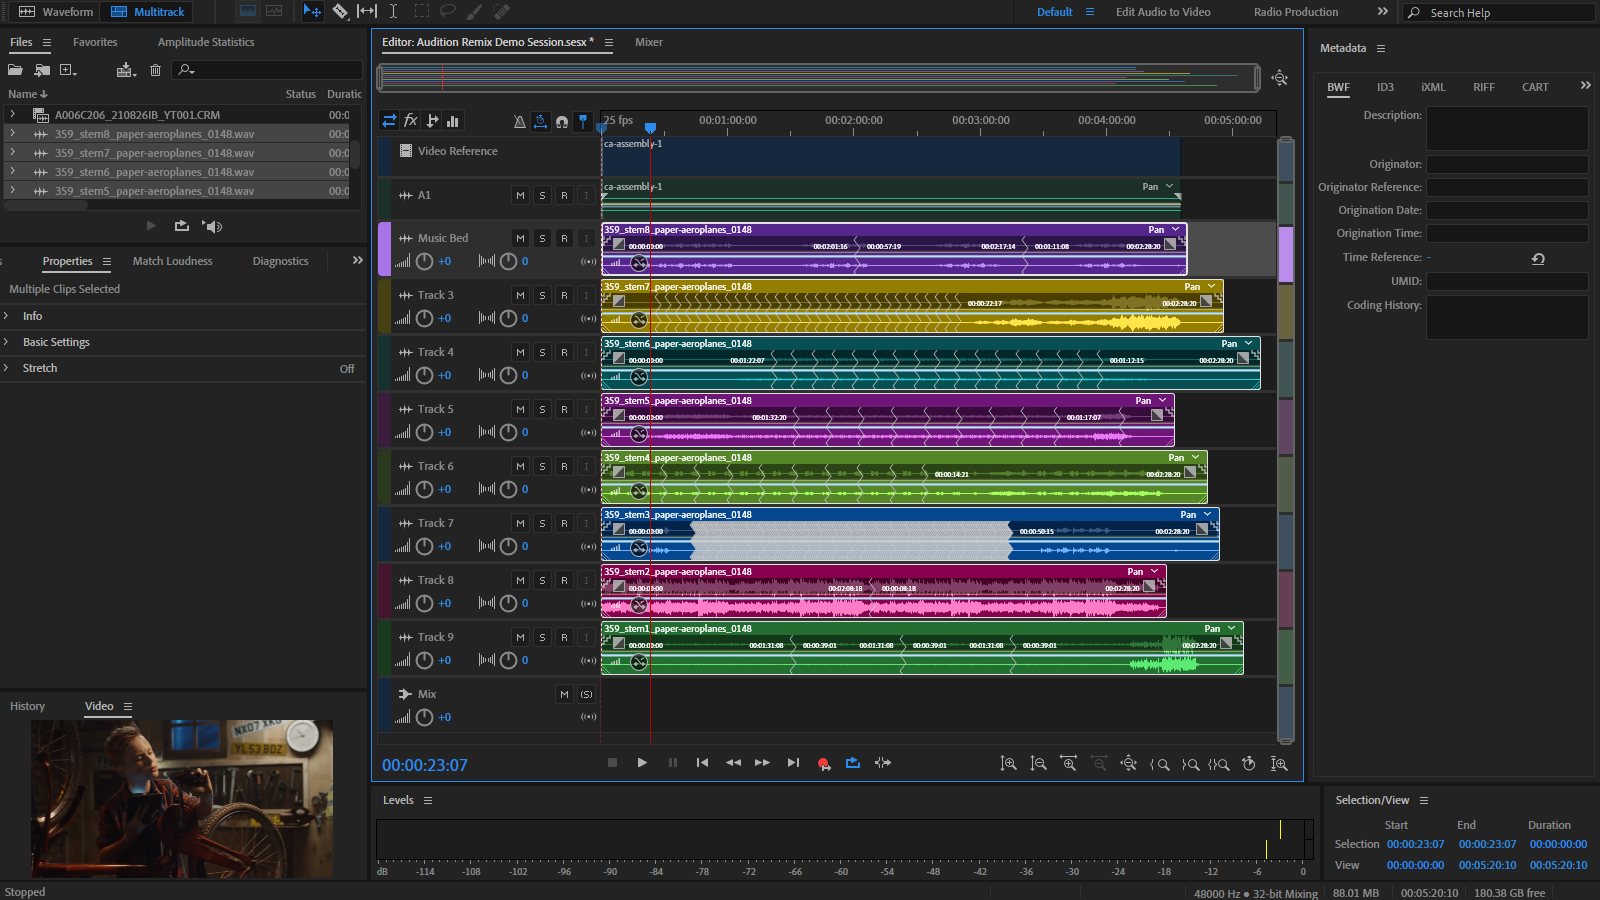 Using Remix on audio stems may not work, but can occasionally provide surprising results